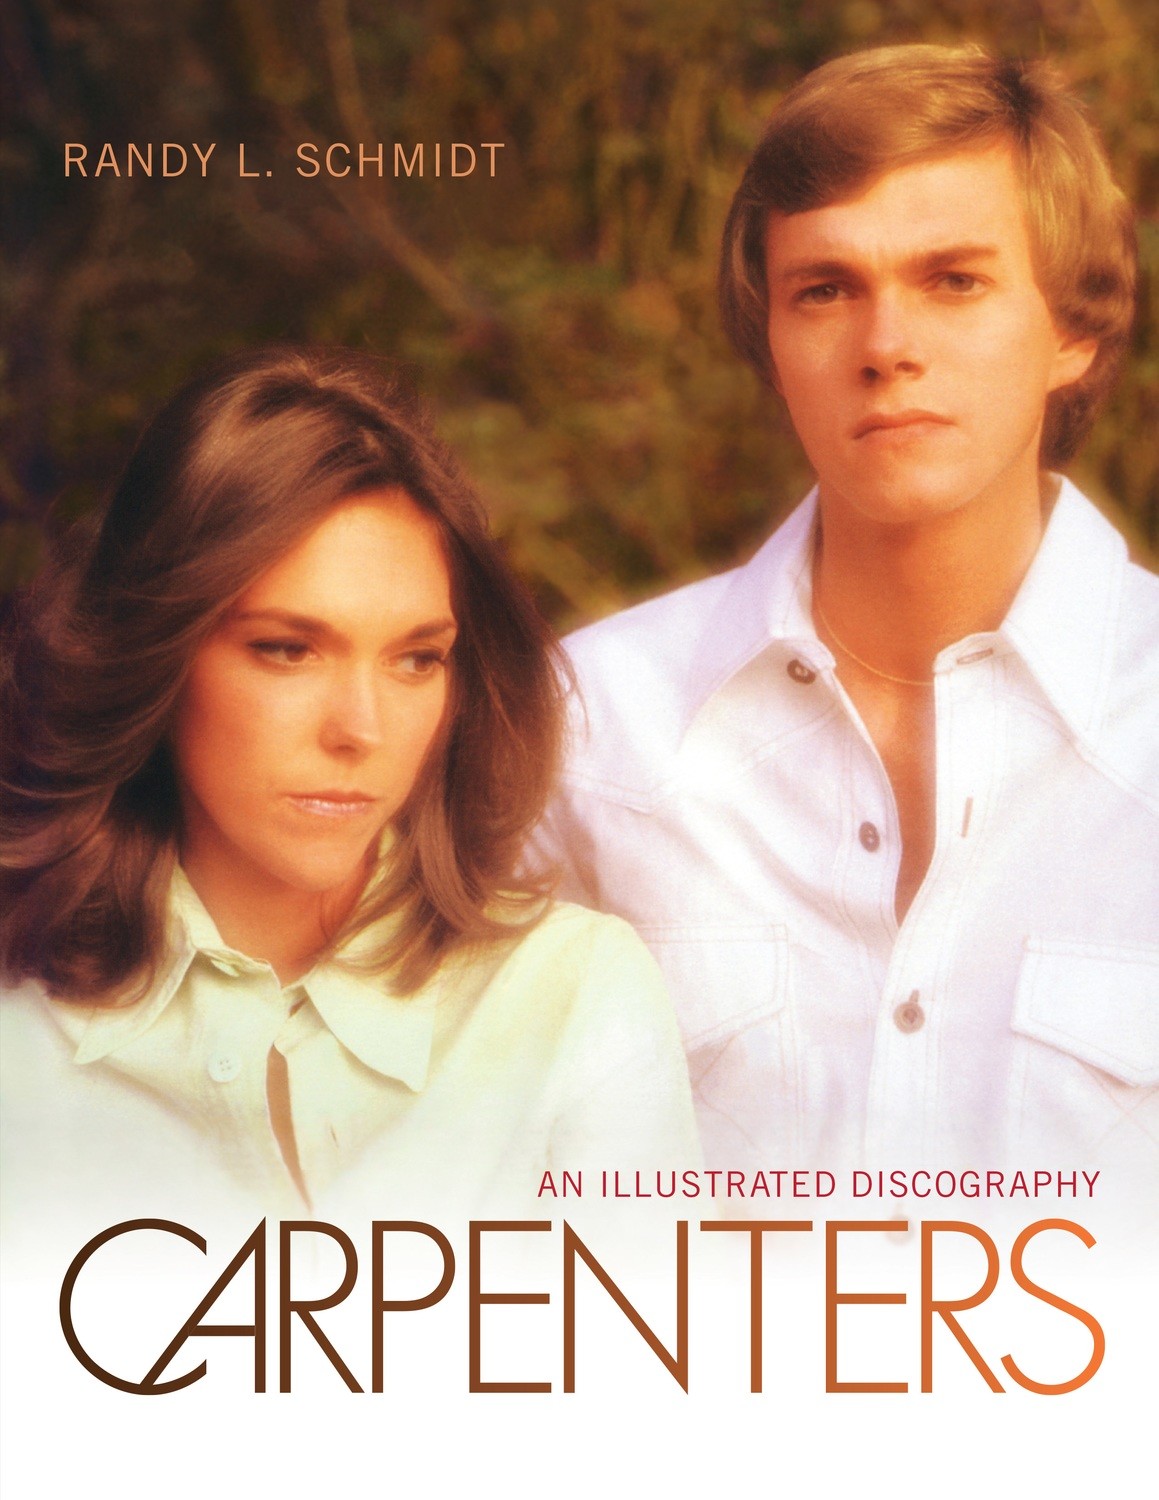 CARPENTERS: AN ILLUSTRATED DISCOGRAPHY - HARDCOVER (SIGNED/UNSIGNED)